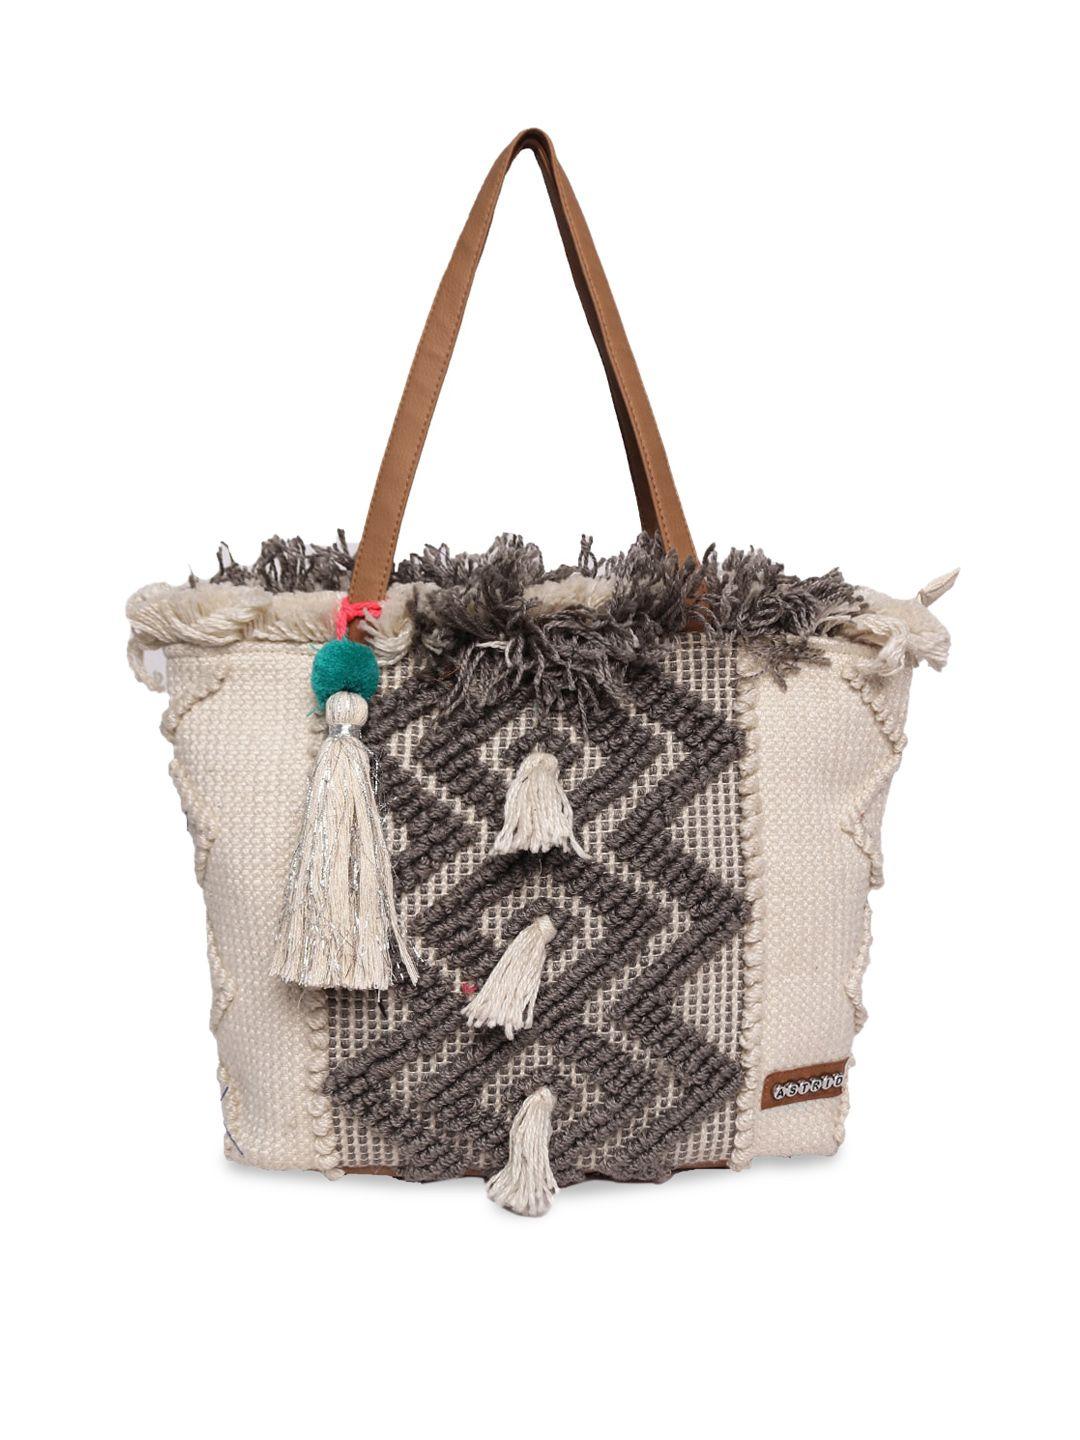 astrid brown oversized shopper tote bag with tasselled